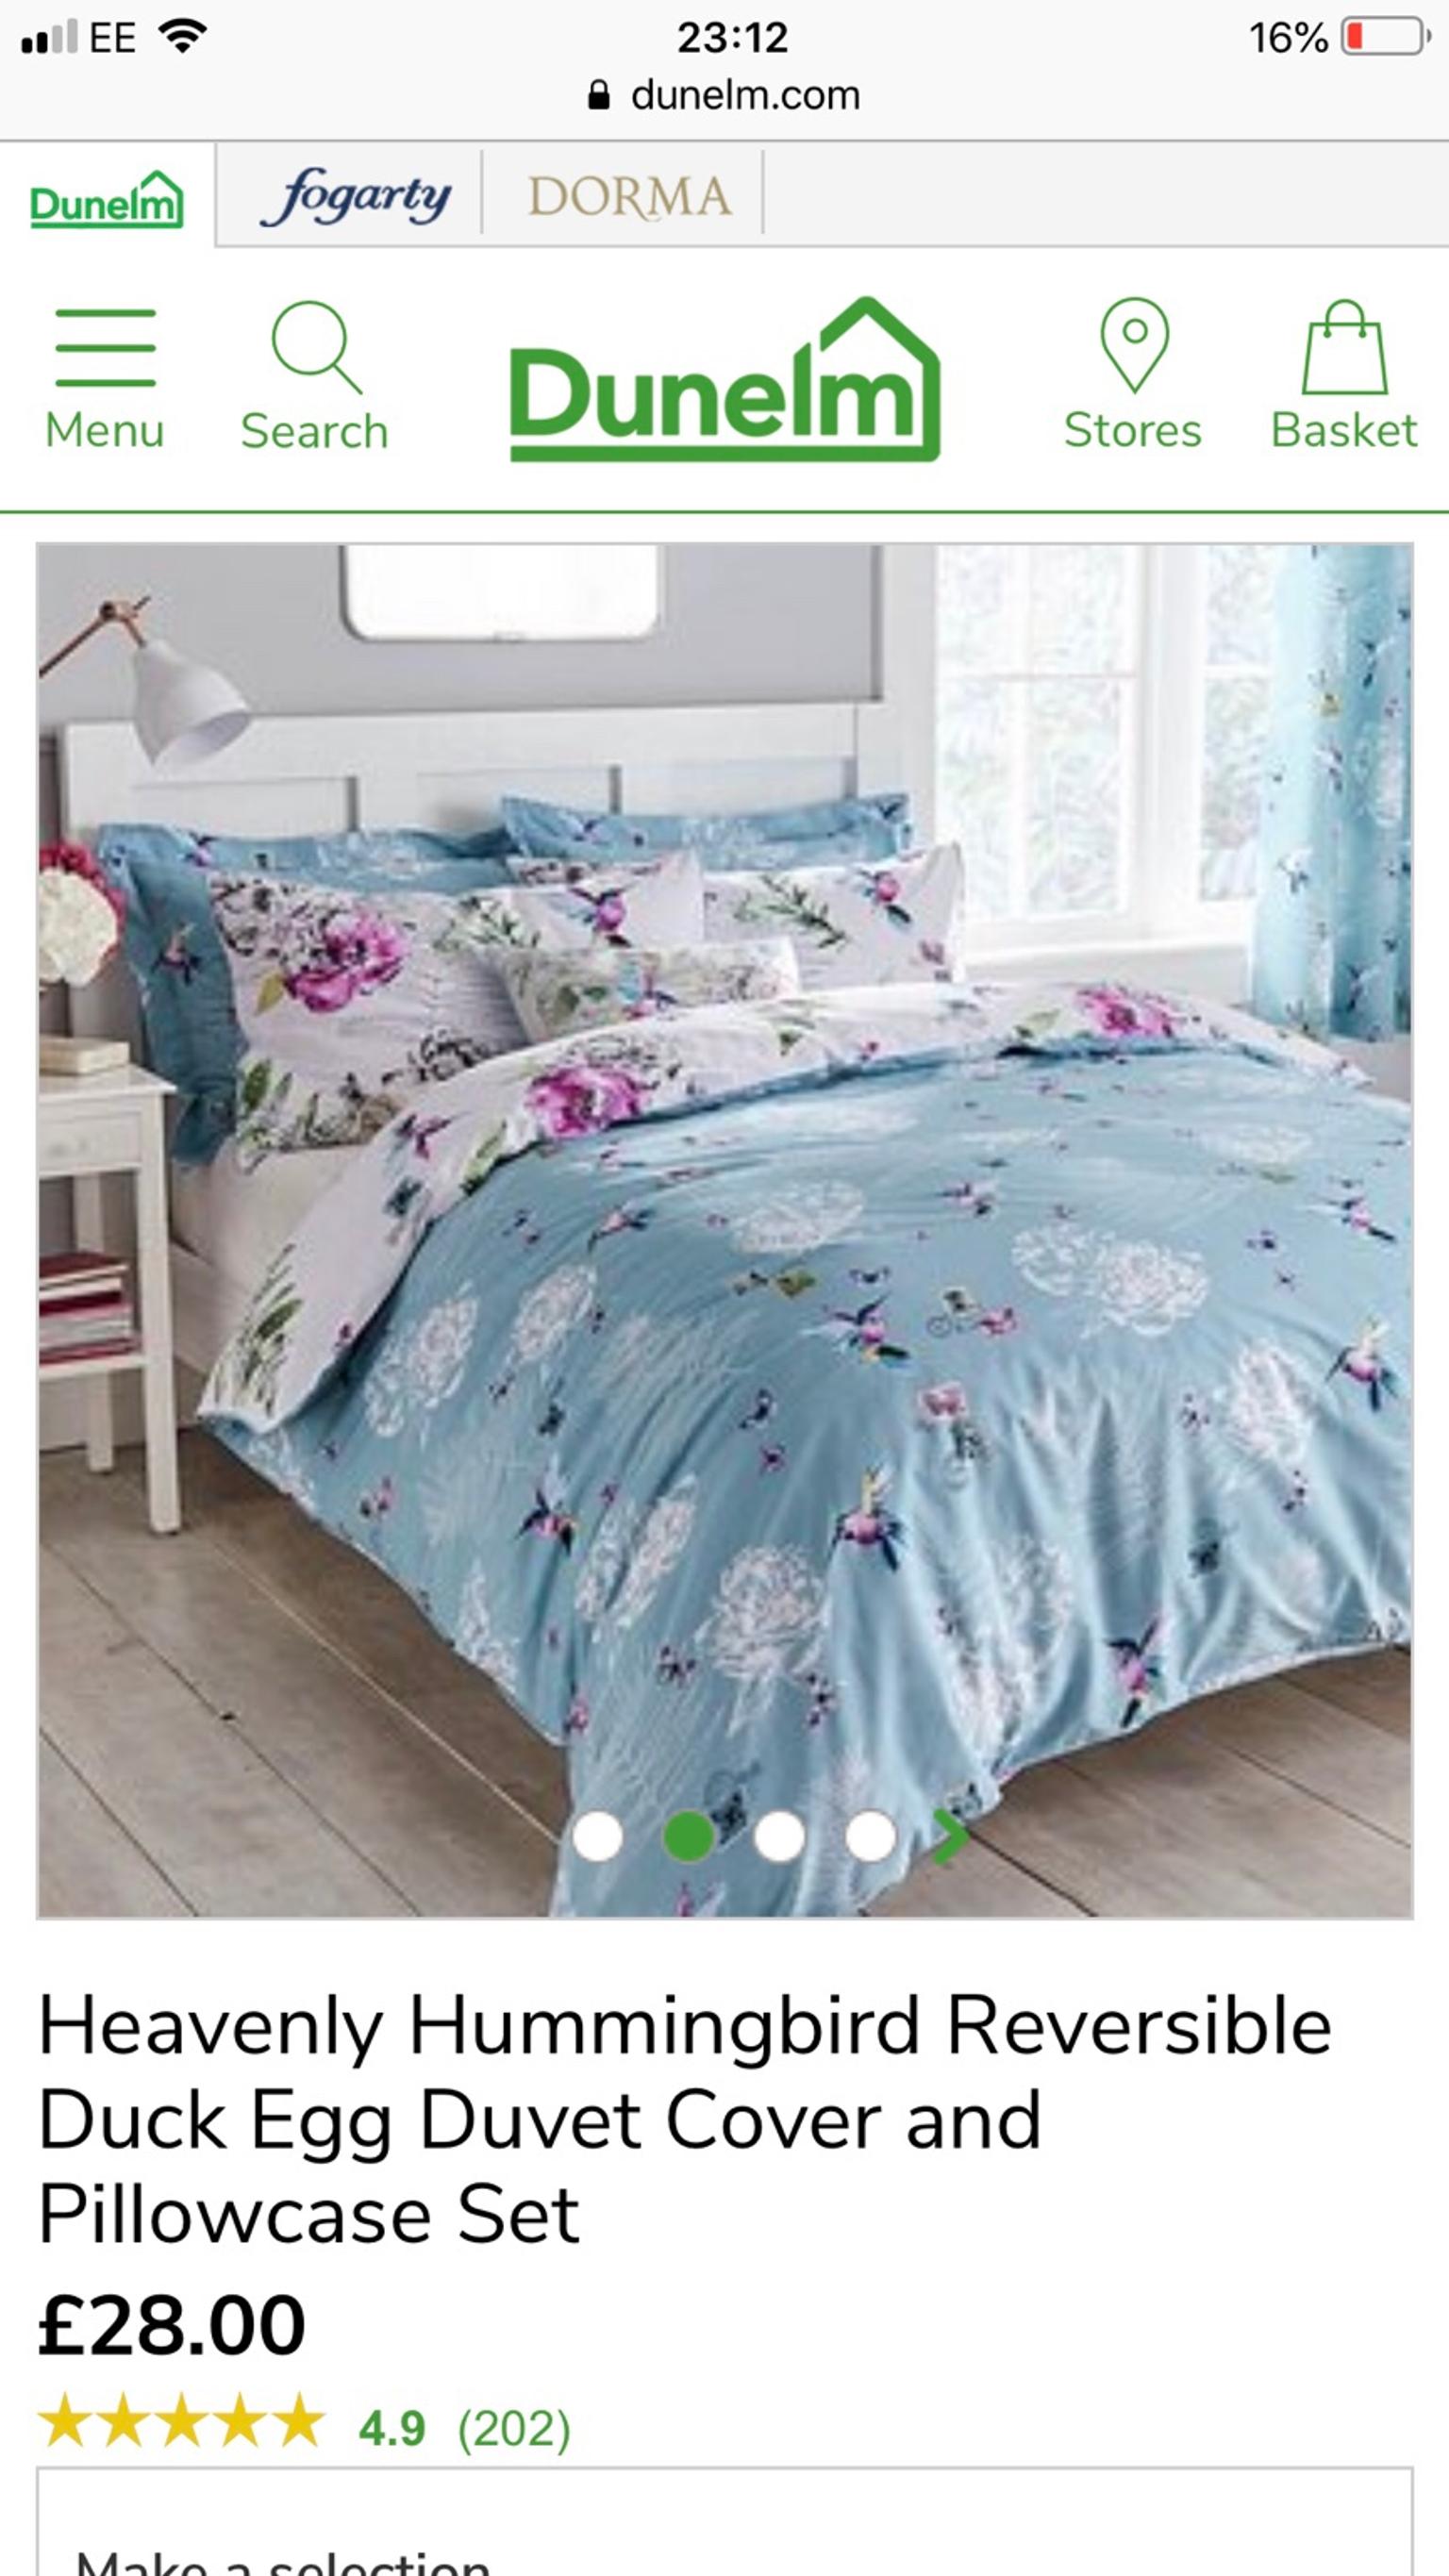 Dunelm Matching Duvet Cover And Curtains In Me5 Chatham For 40 00